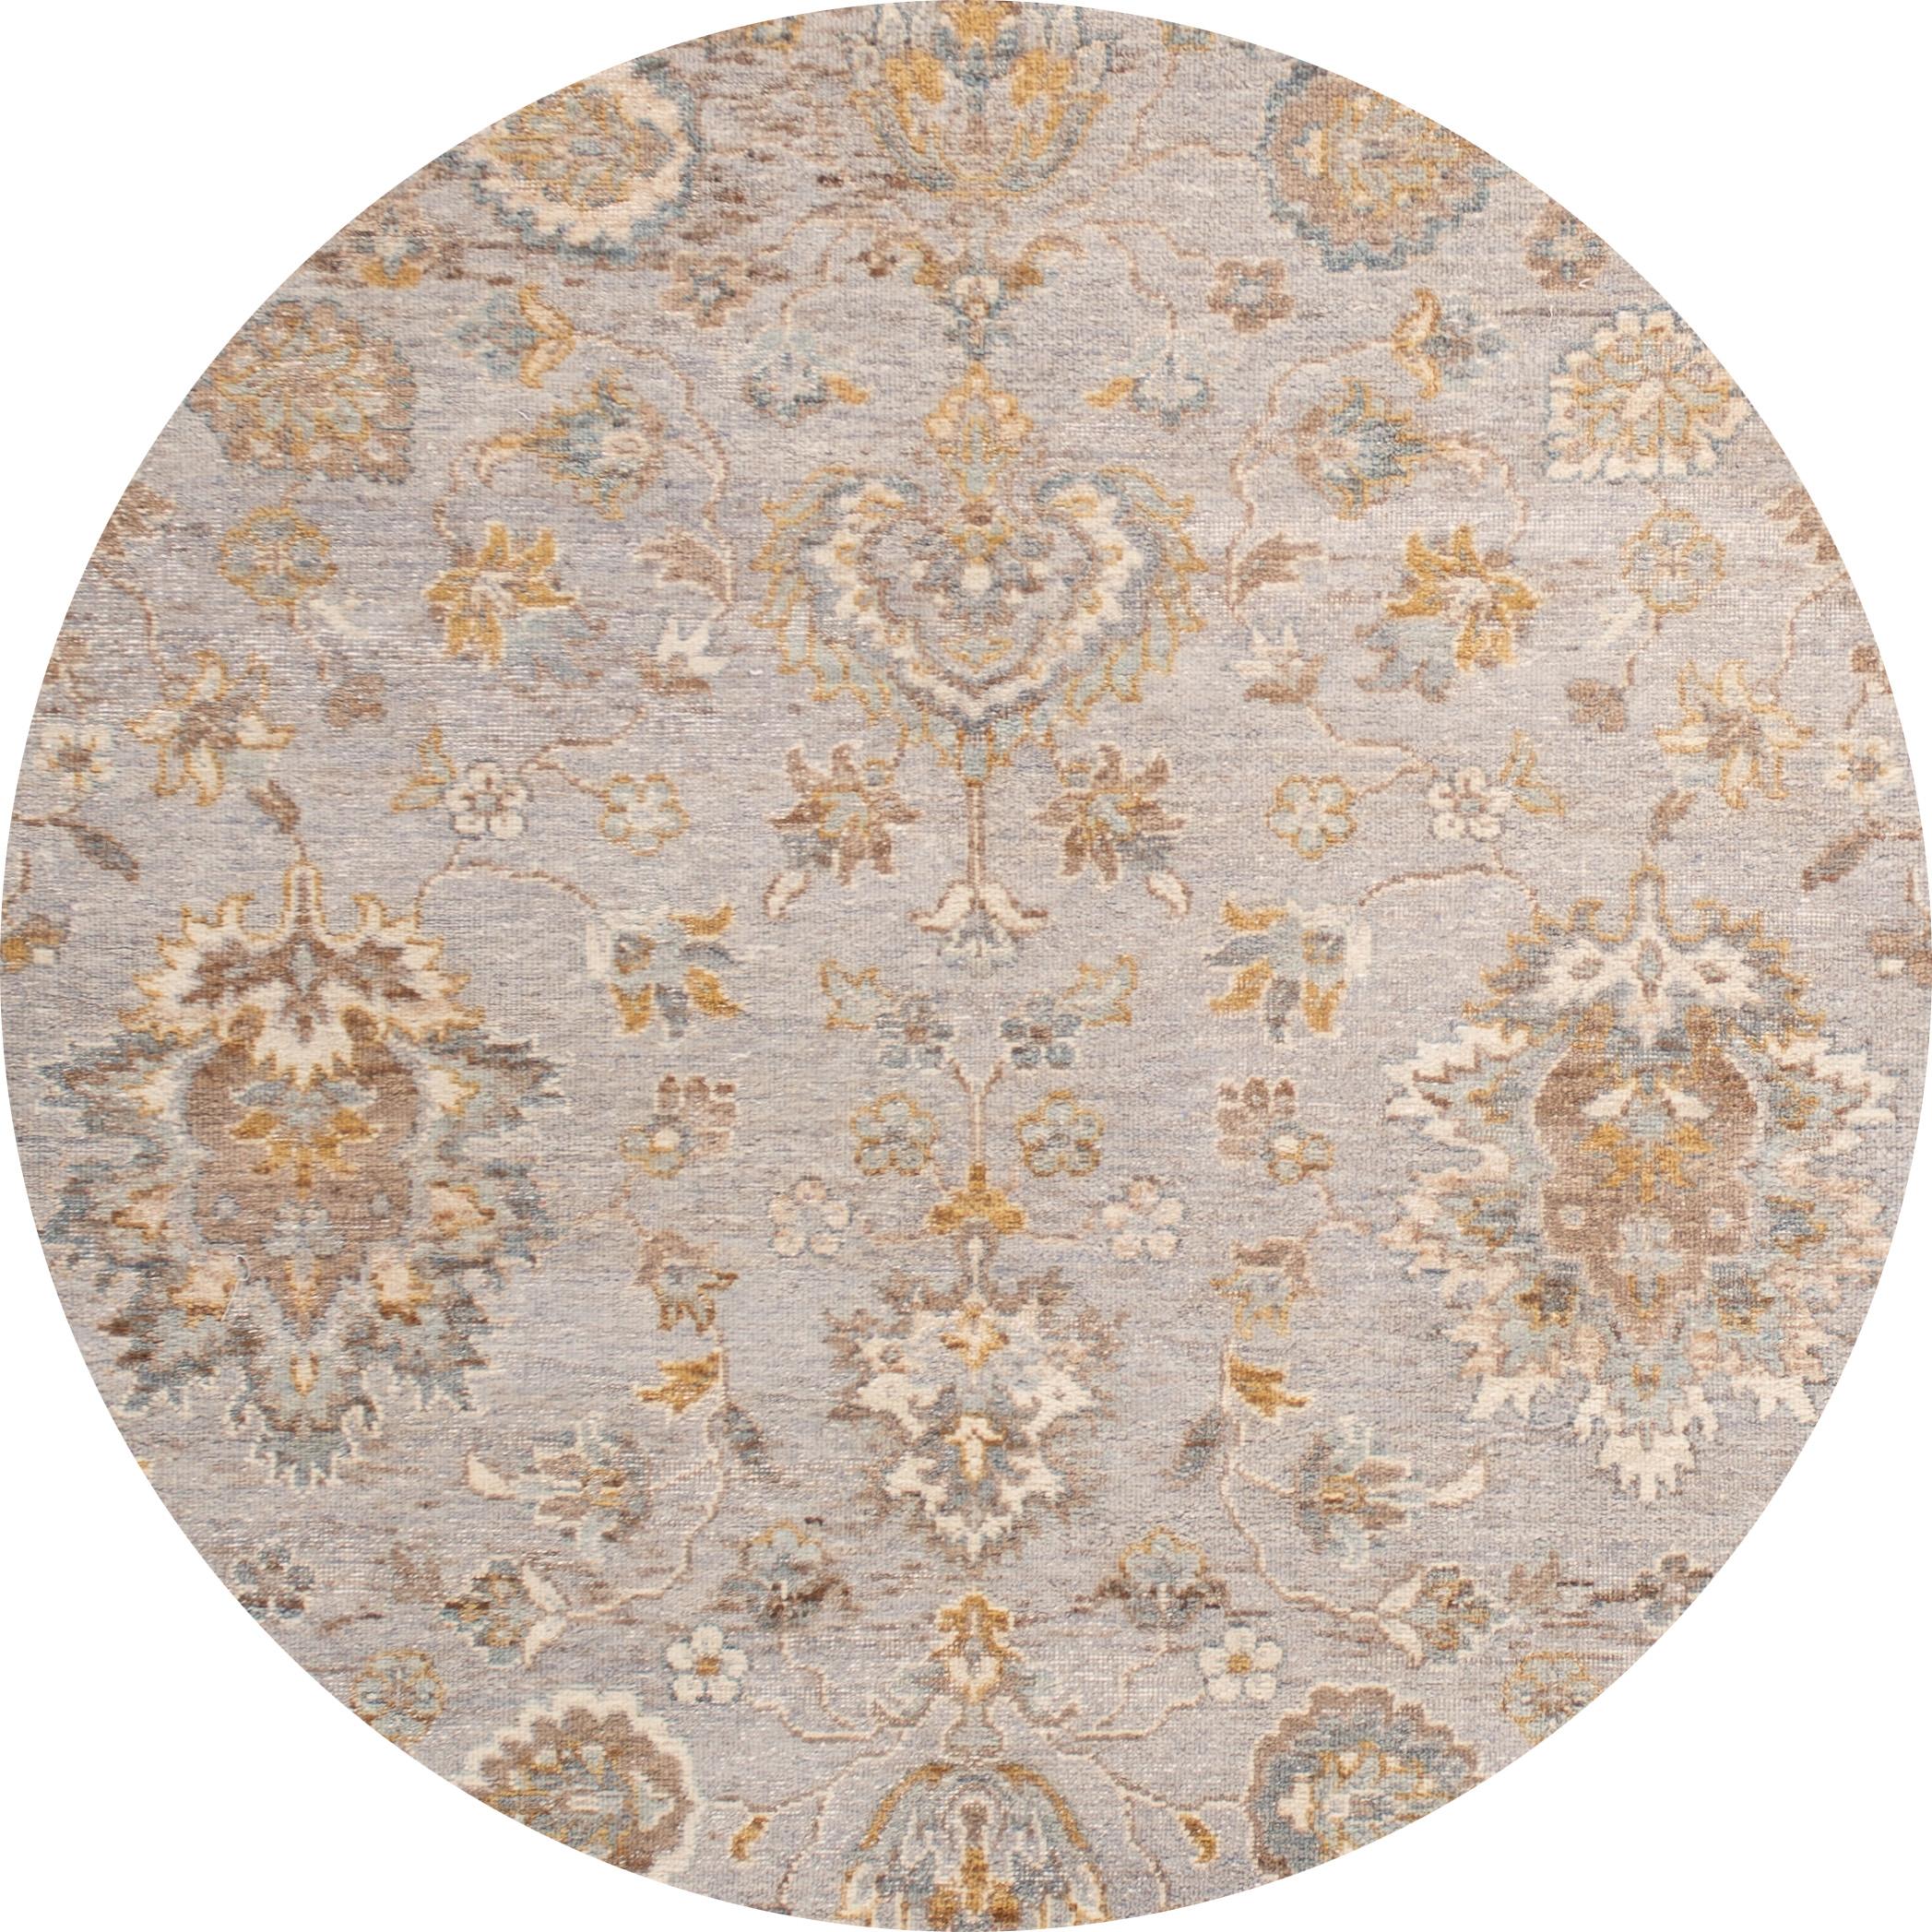 Beautiful contemporary Indian rug, hand knotted wool, with a light gray field, tan and ivory accents in an all-over Classic motif, circa 2019.
This rug measures 4' 2